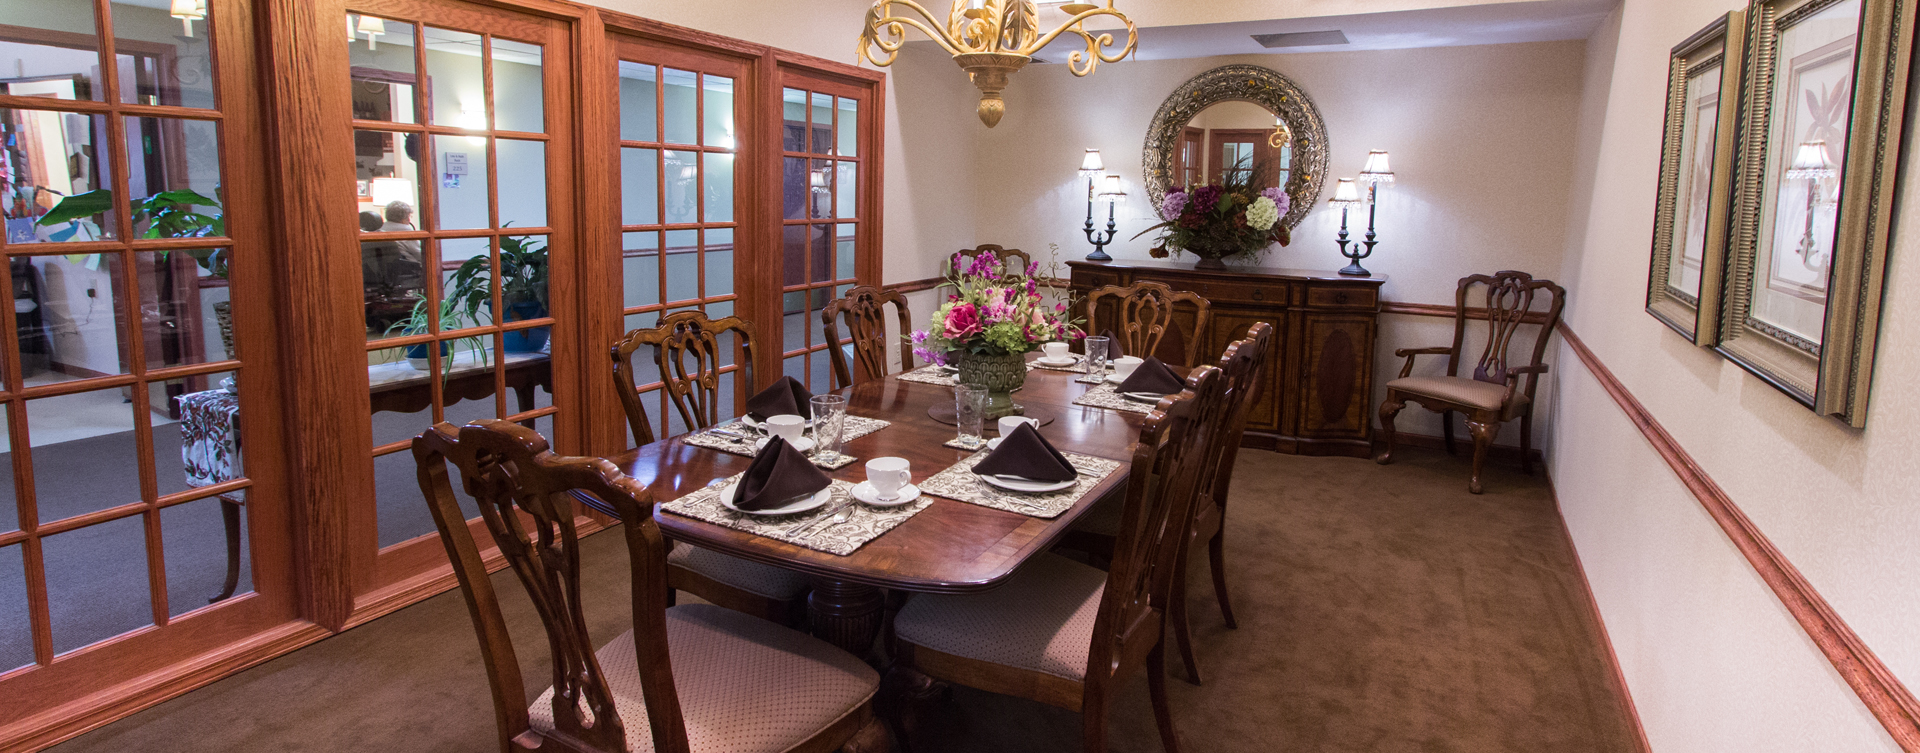 Food is best when shared with family and friends in the private dining room at Bickford of Bourbonnais